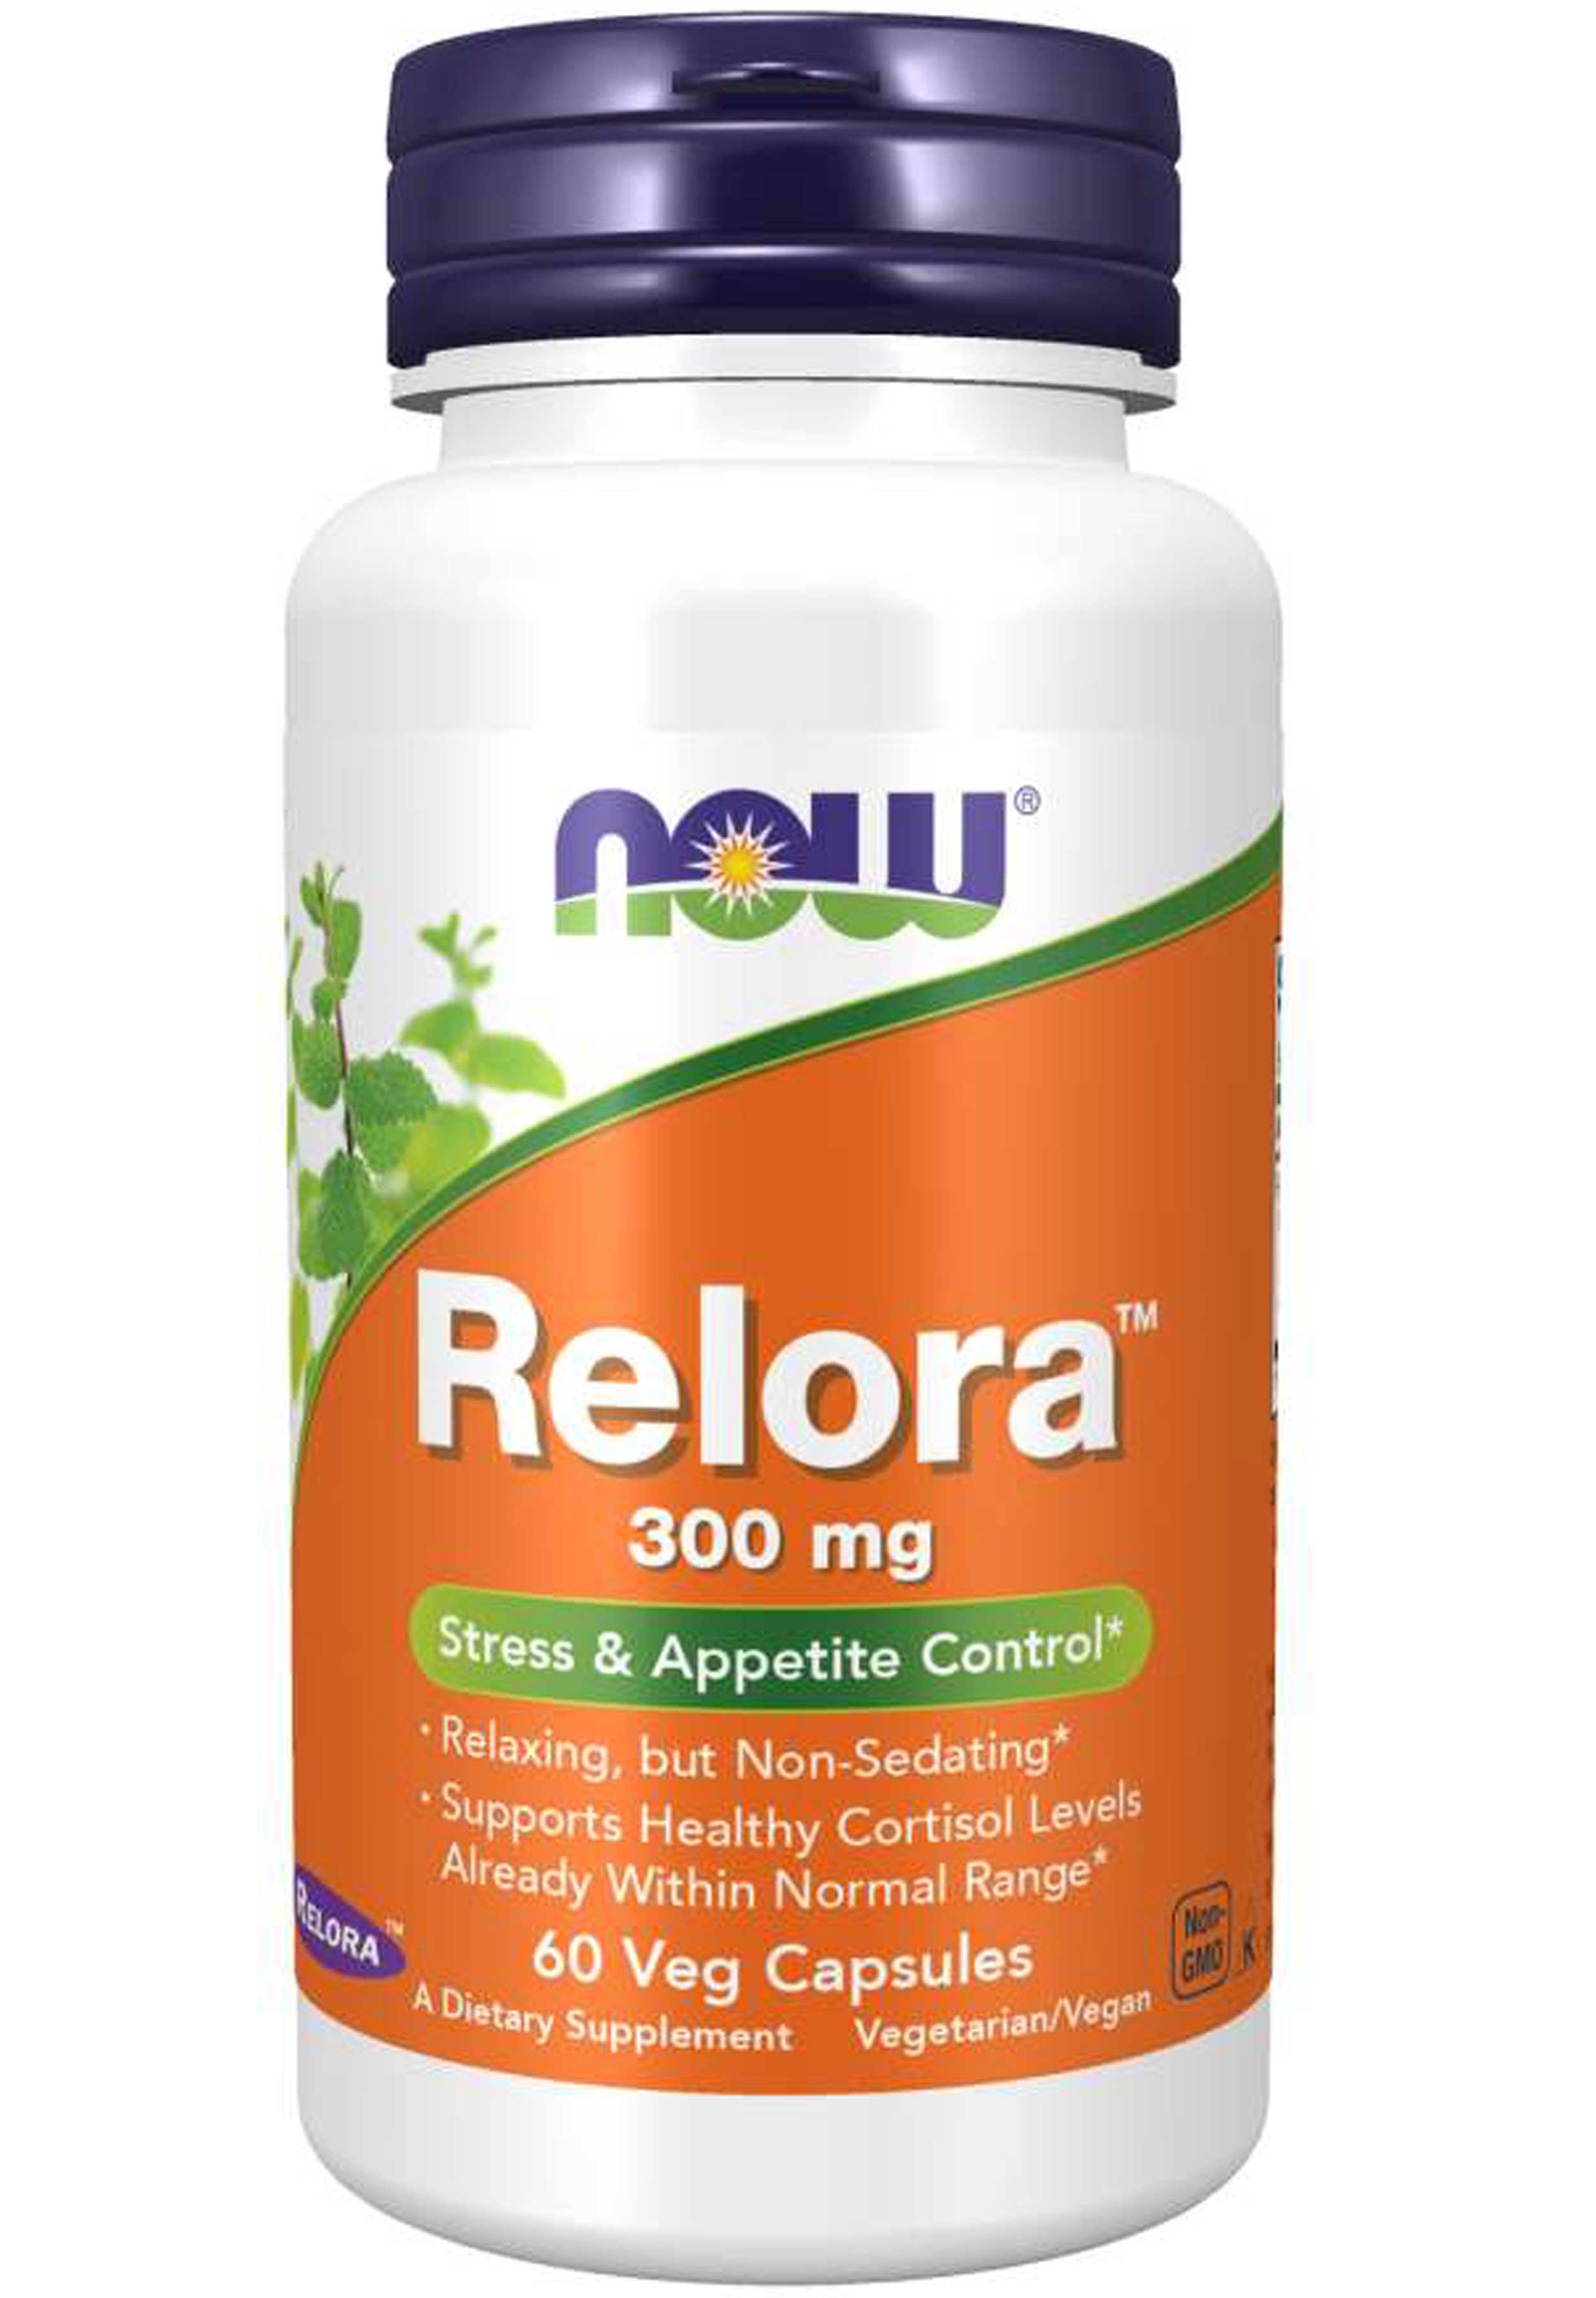 NOW Relora 300 mg